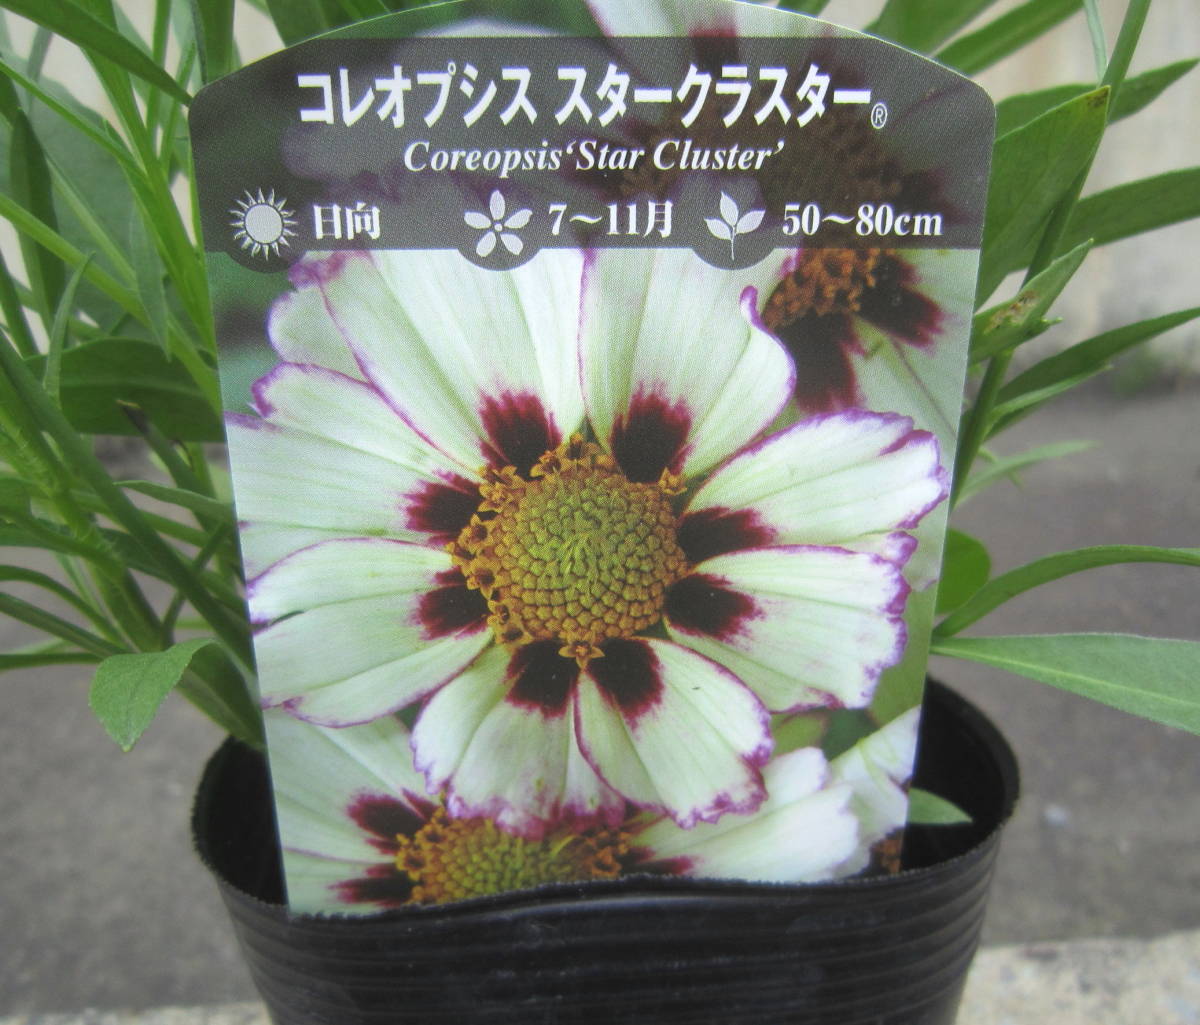 ∮ popular goods kind a little over enduring cold . change ... wheel pico tikore OP sis Star cluster big van series enduring cold . root . flower ground .. potted plant 